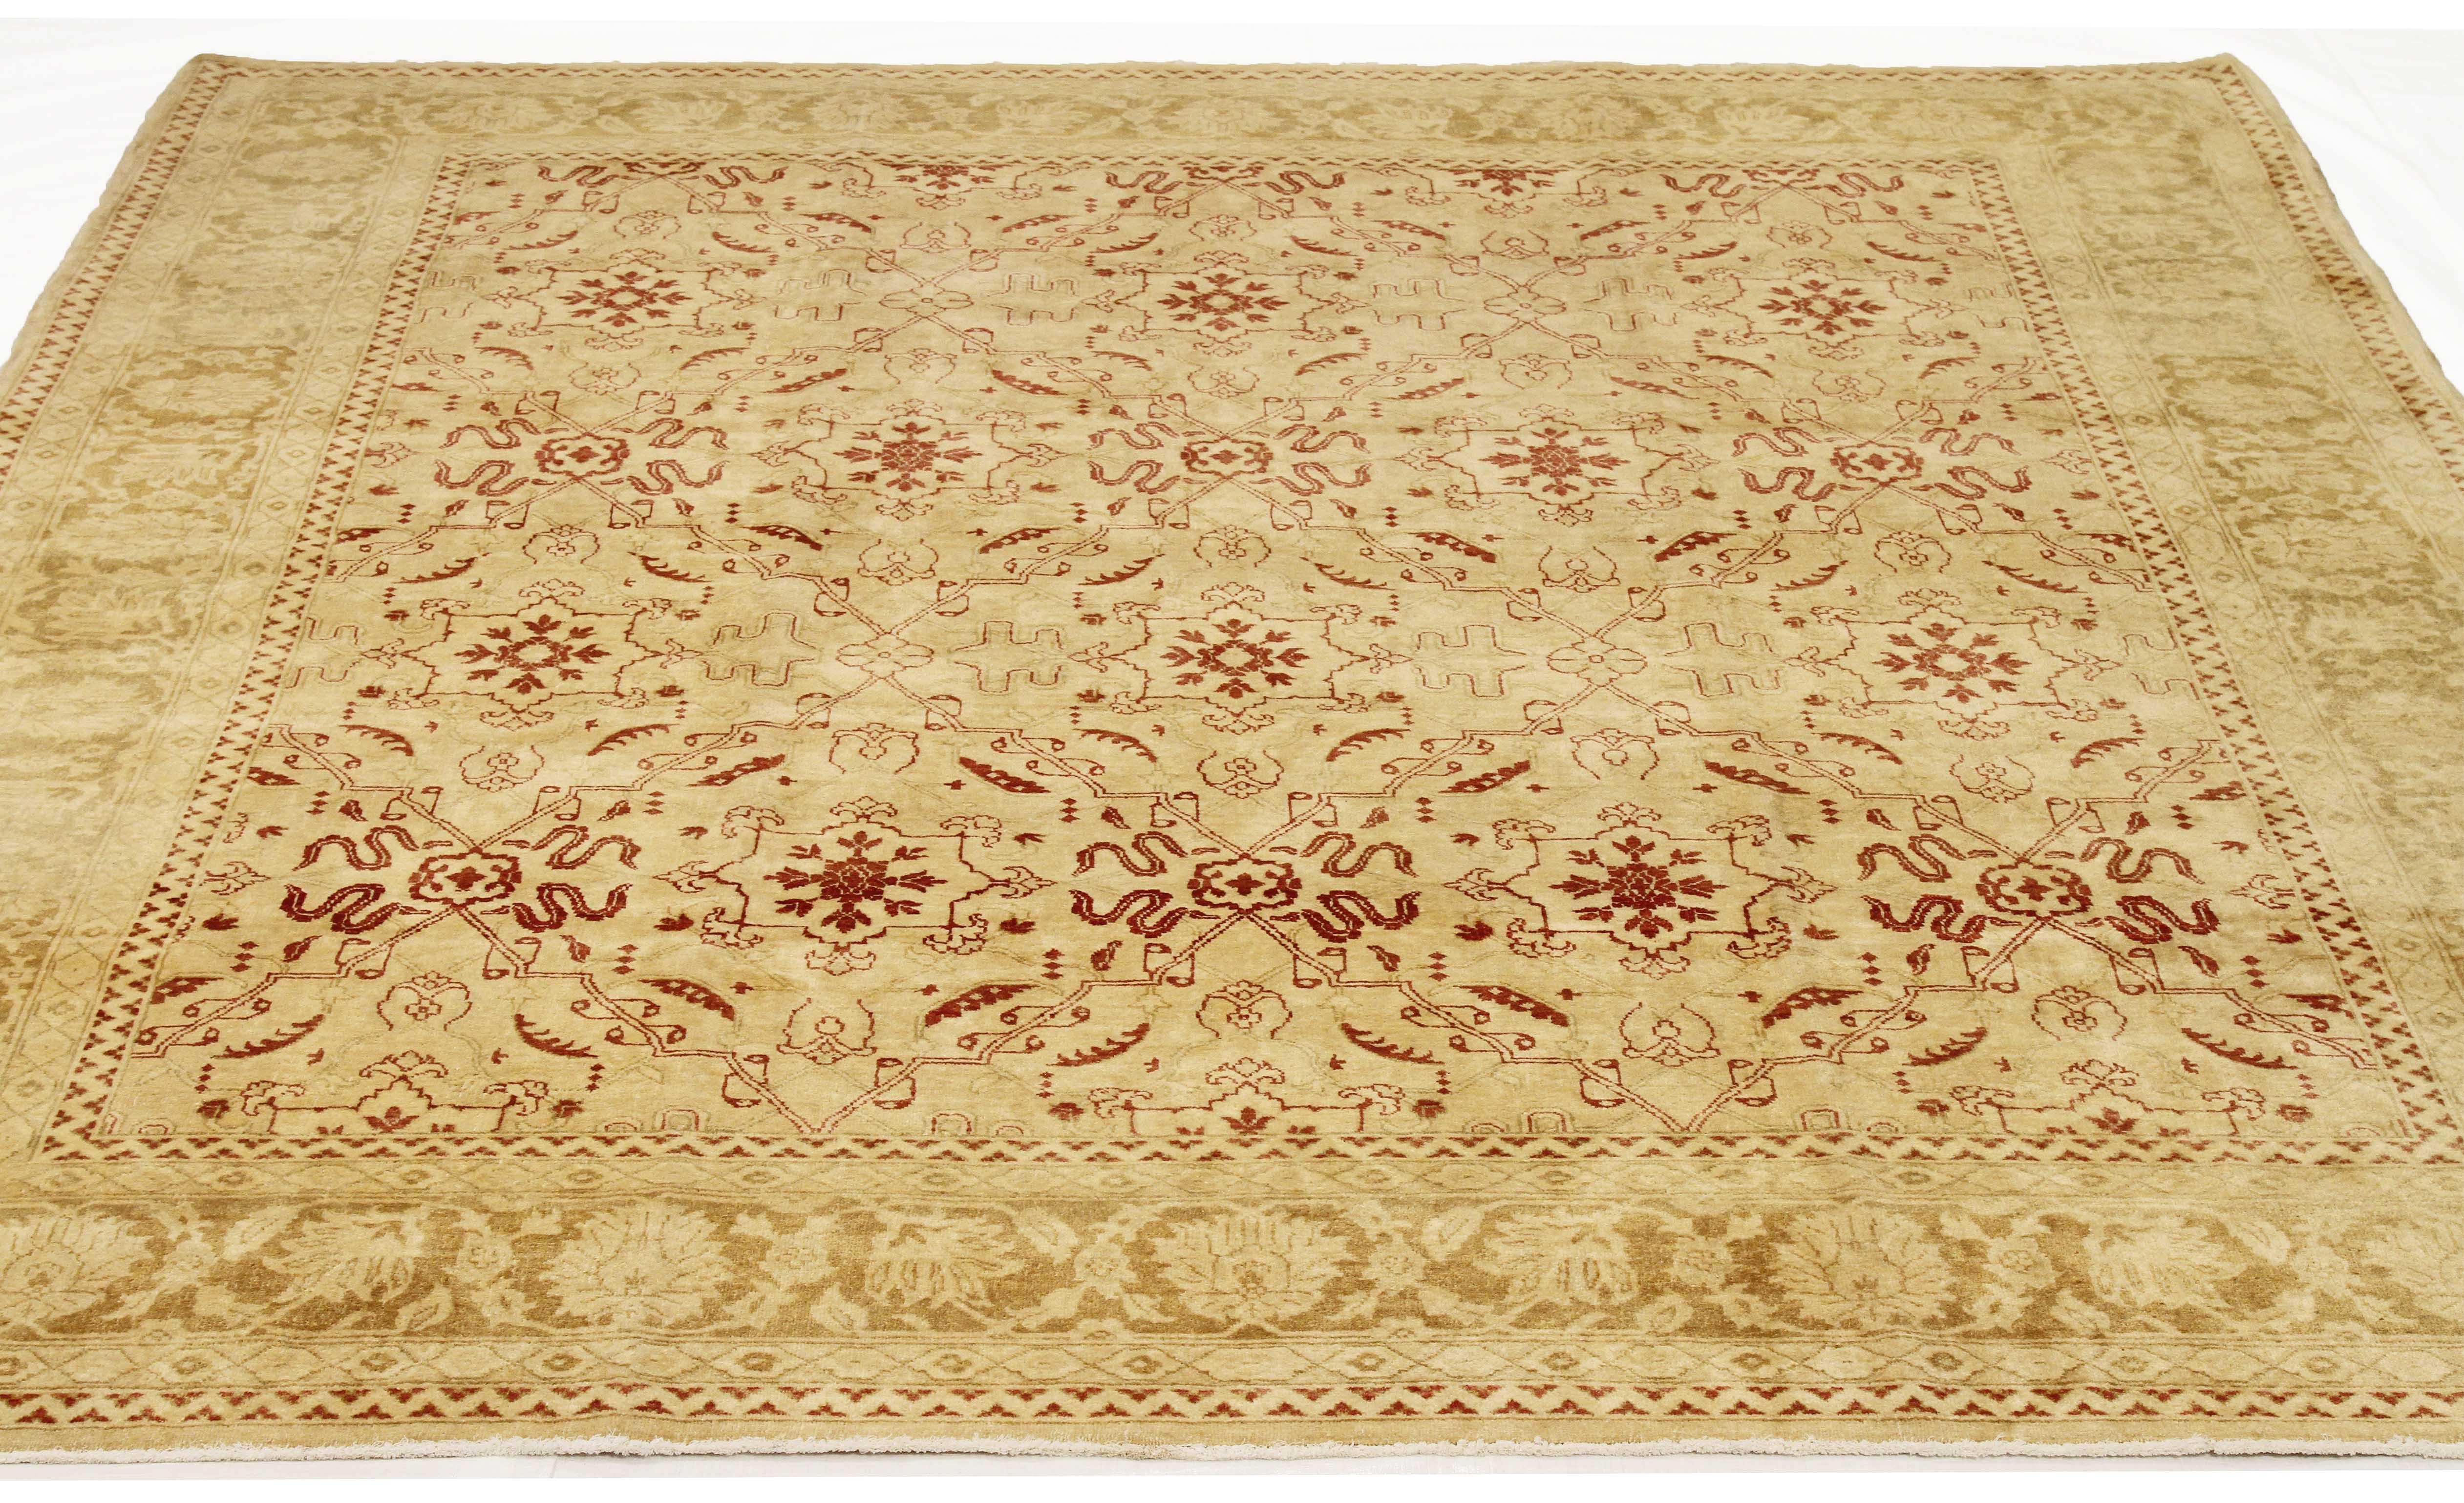 Contemporary Turkish rug handwoven from the finest sheep’s wool and colored with all-natural vegetable dyes that are safe for humans and pets. It’s a traditional Agra weaving design featuring botanical patterns in red and ivory on a plush beige